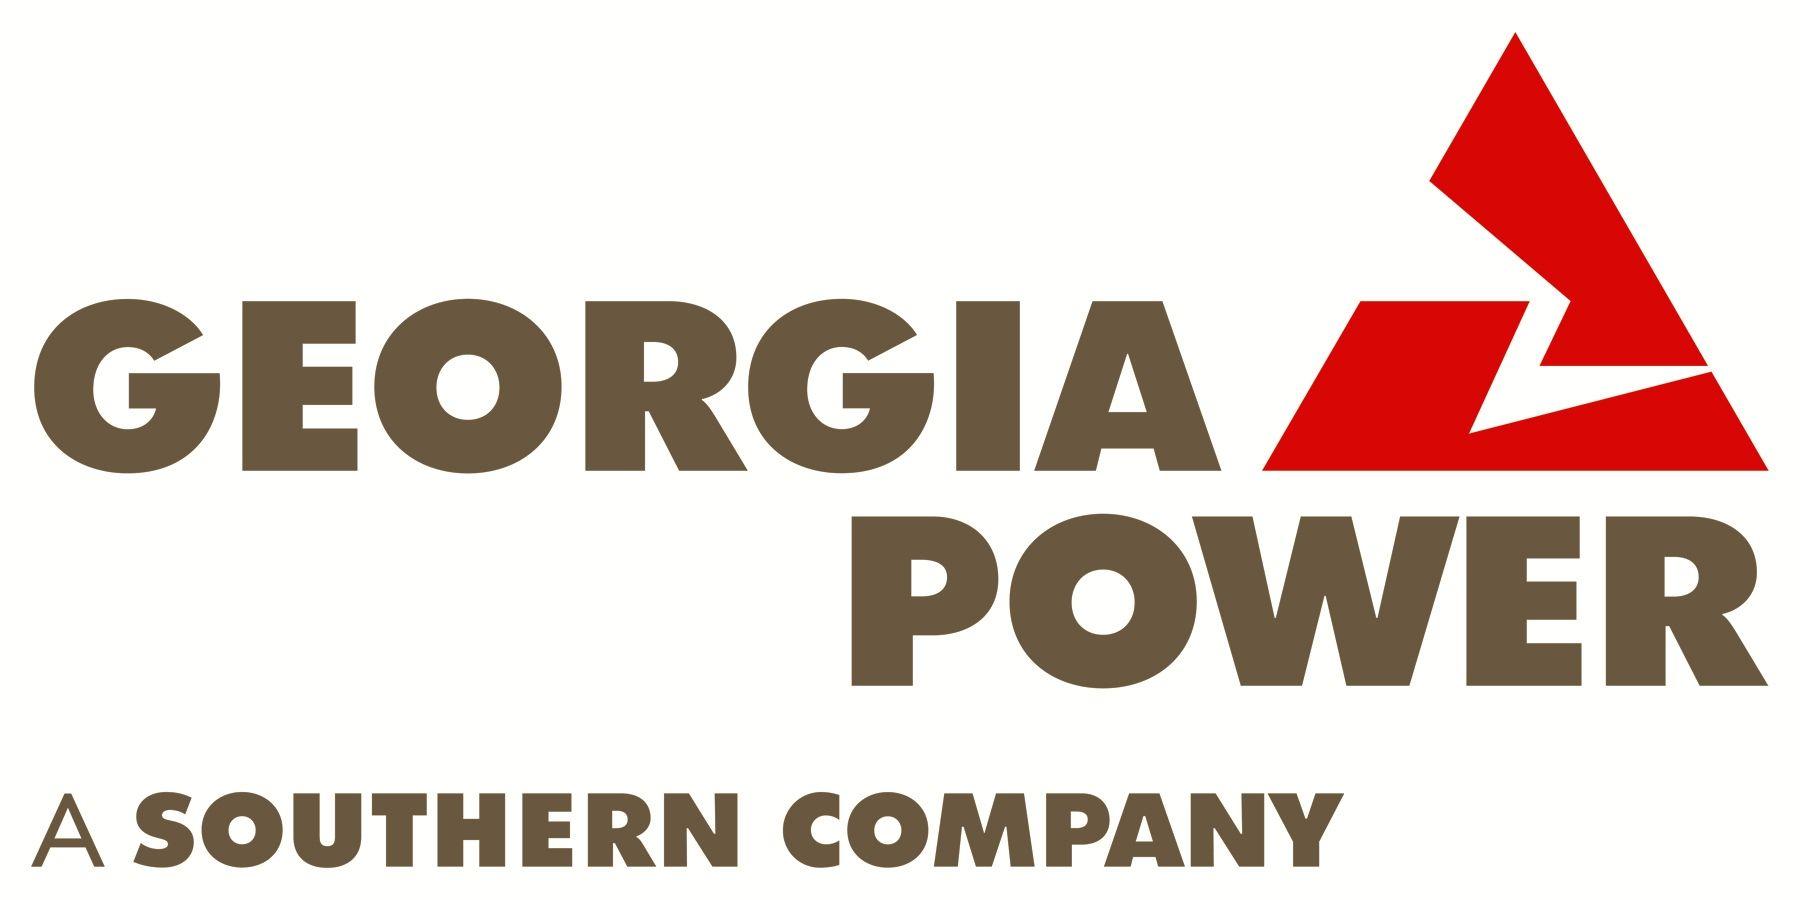 Southern Company Logo - Images